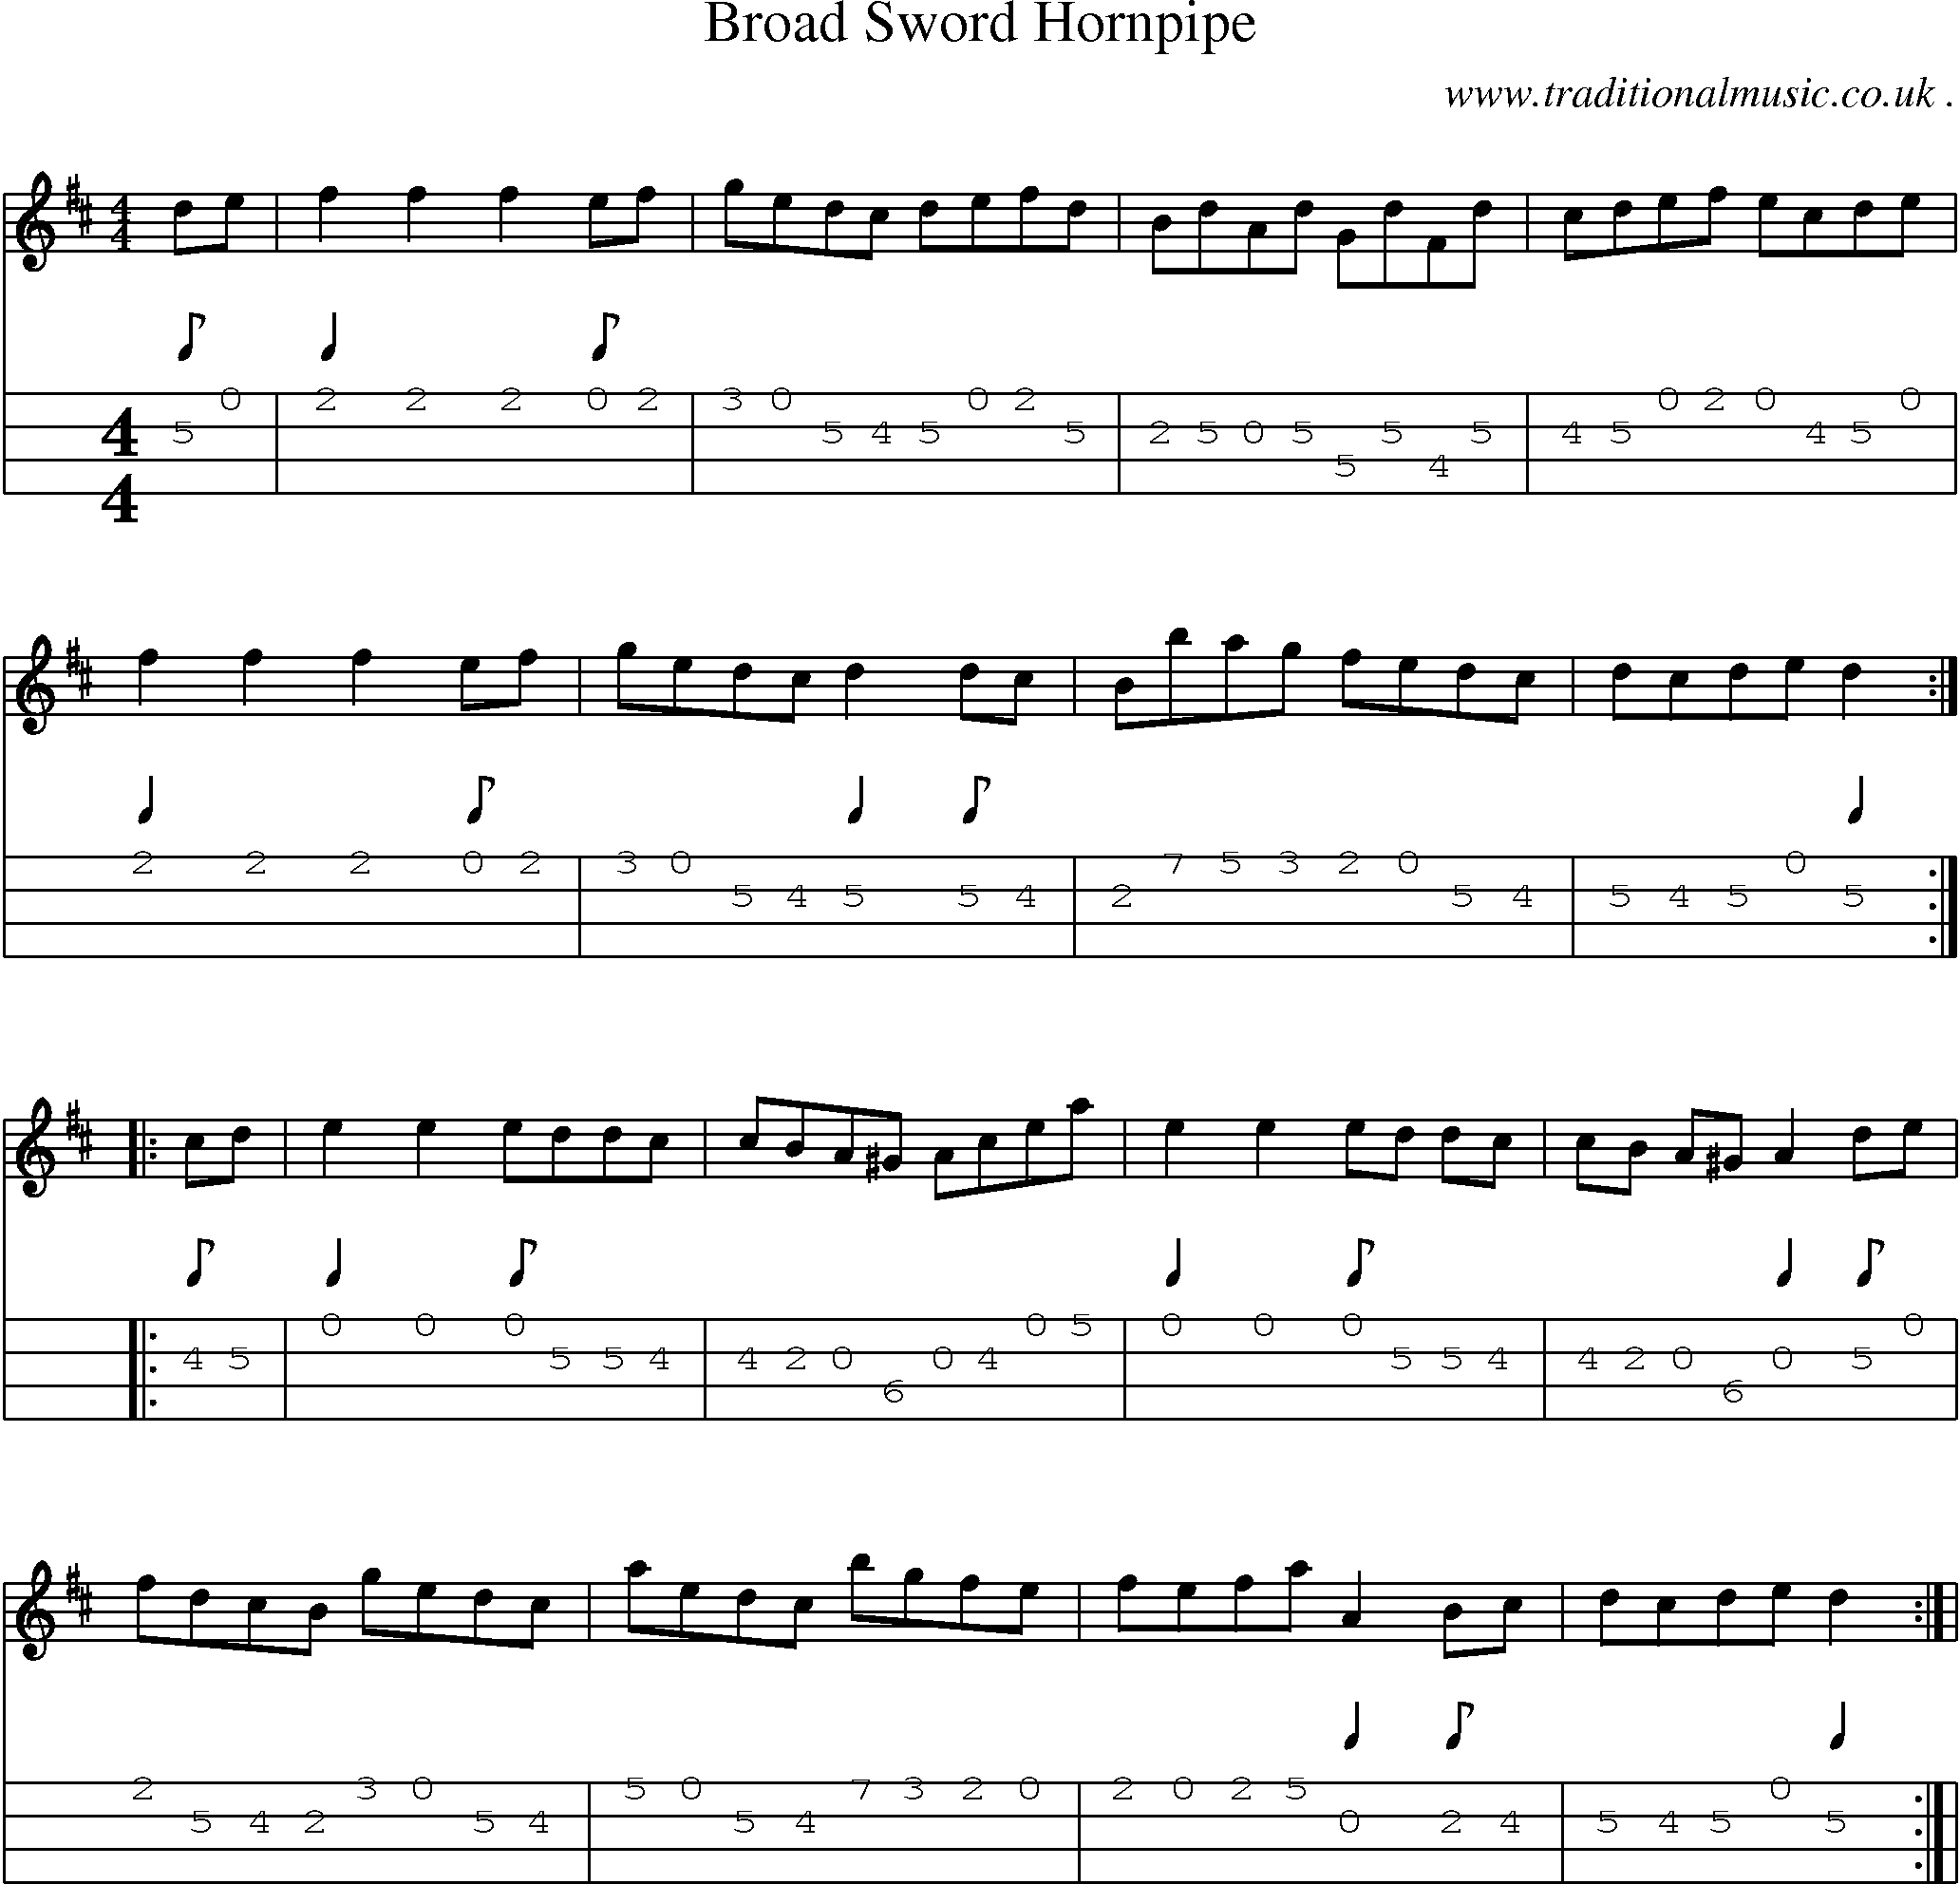 Sheet-Music and Mandolin Tabs for Broad Sword Hornpipe